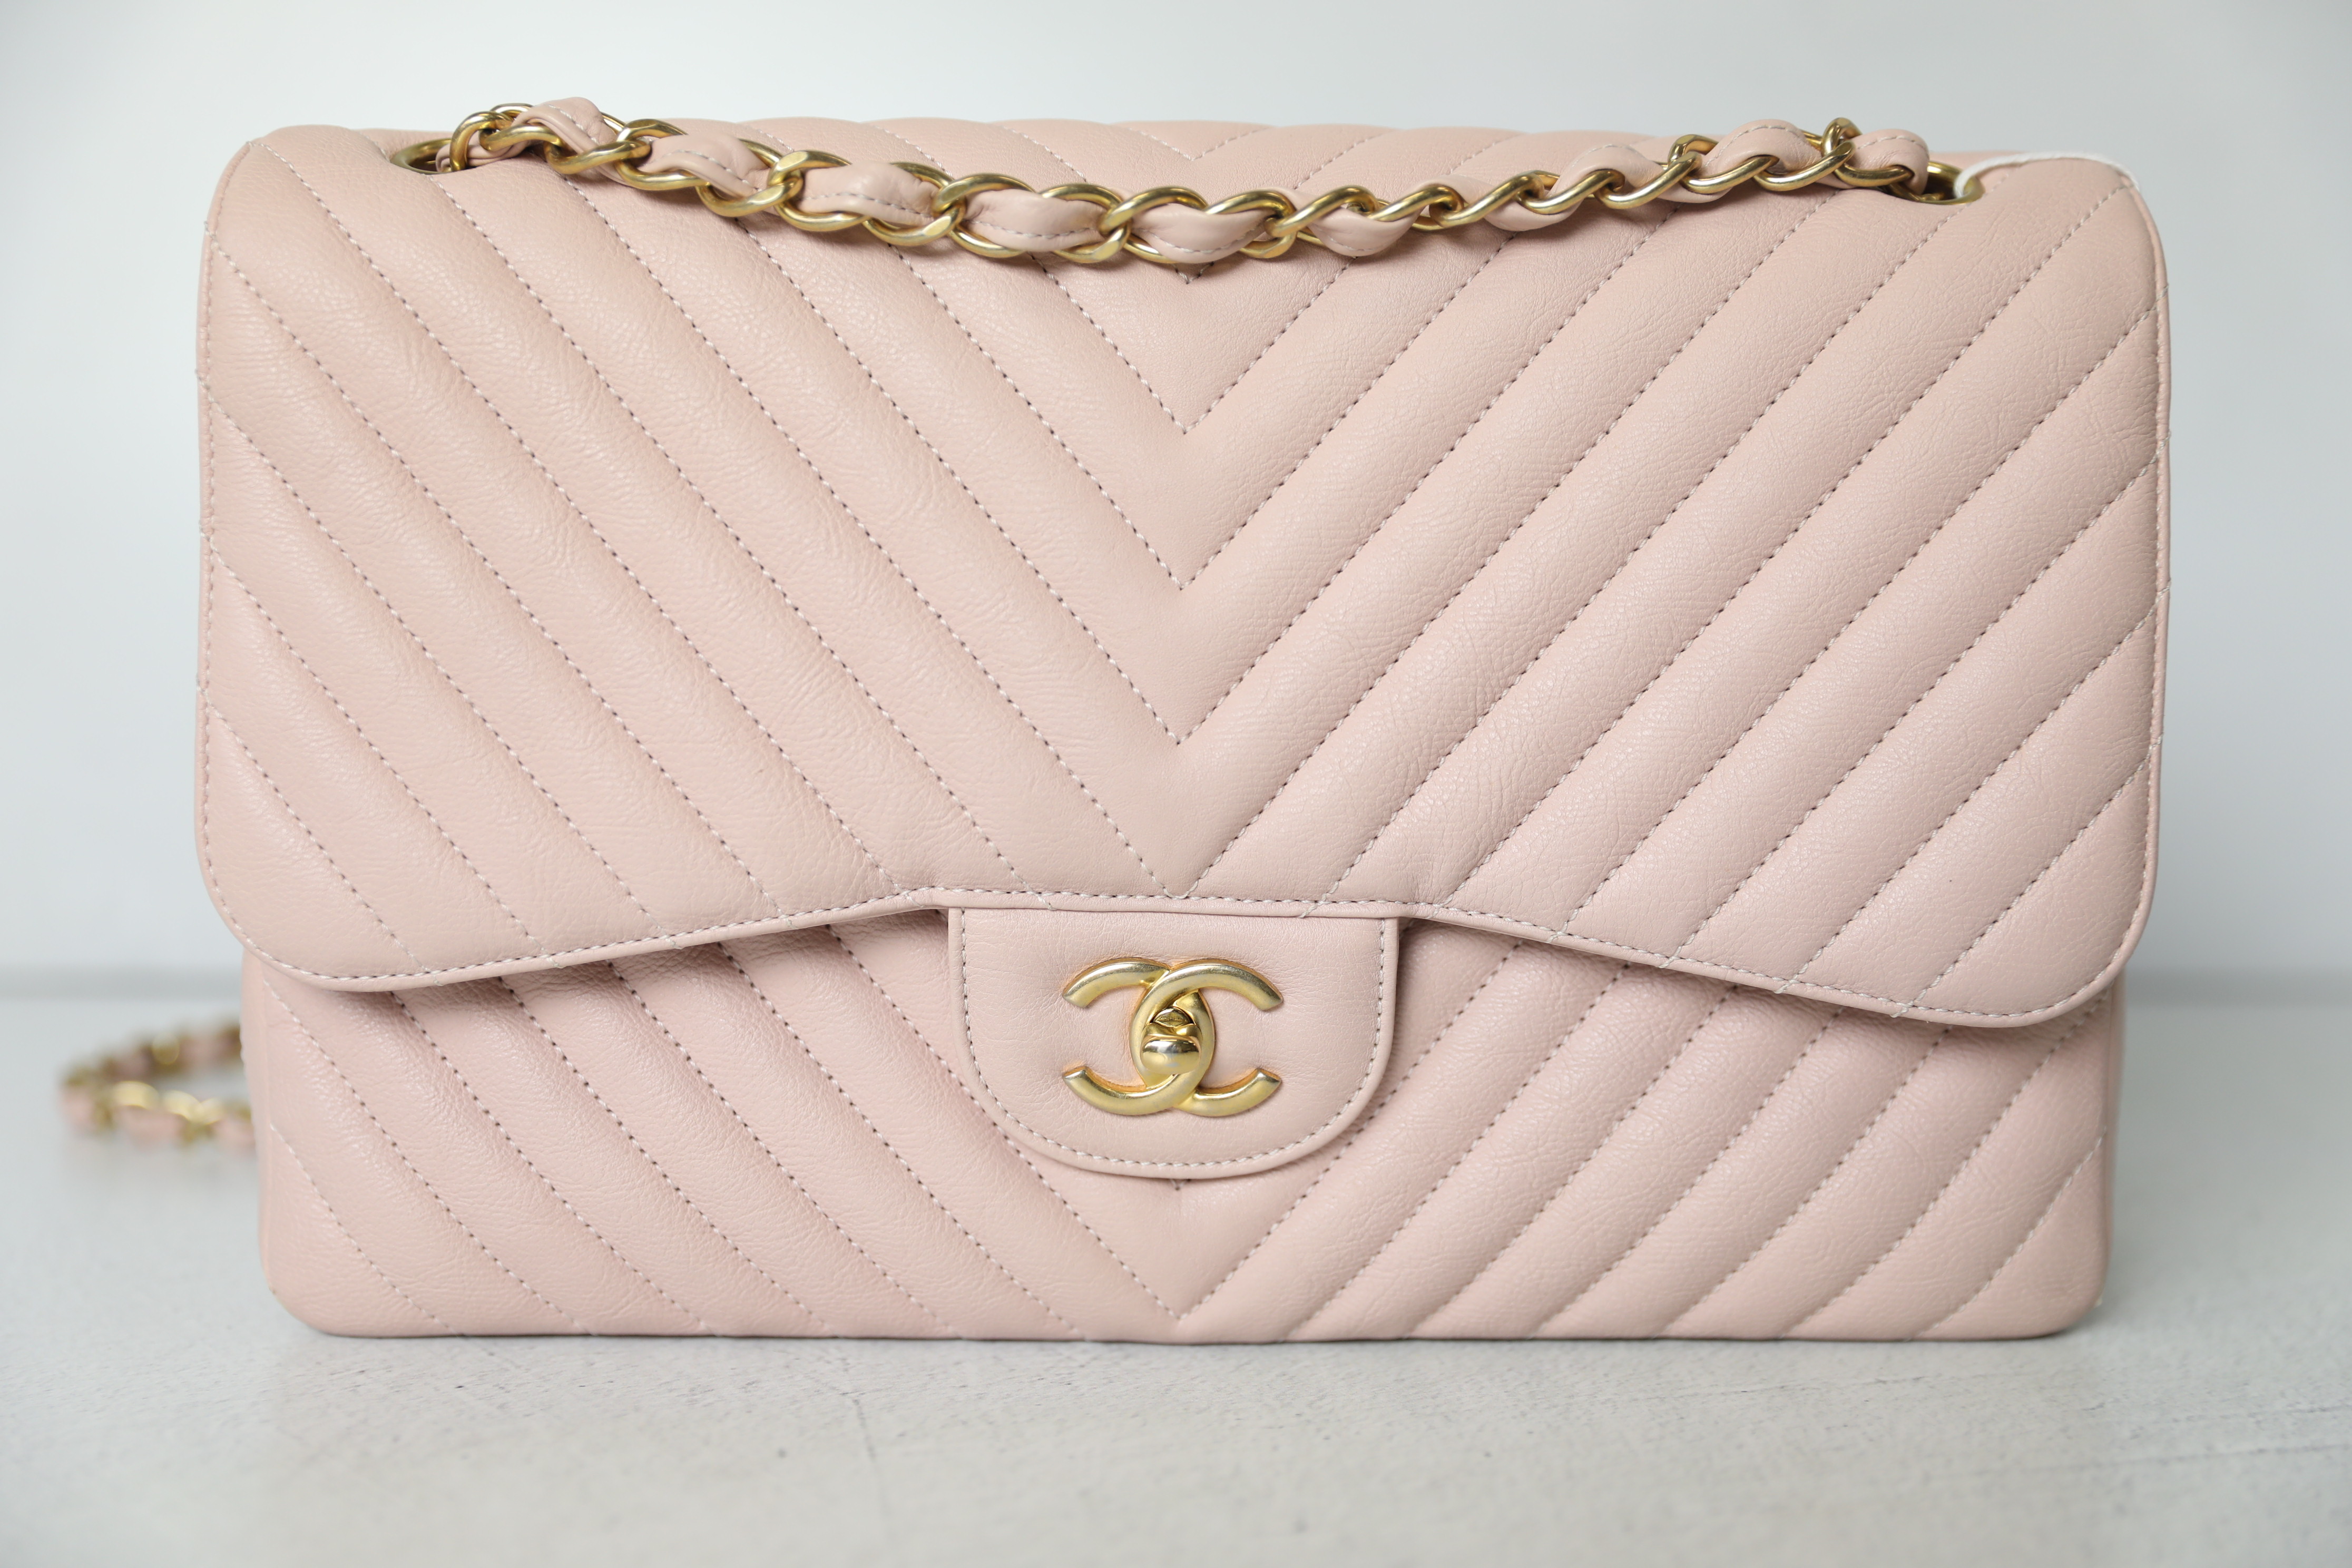 Chanel Classic Jumbo Double Flap, Pink Chevron Calfskin Leather with Gold  Hardware, Preowned No Dustbag WA001 - Julia Rose Boston